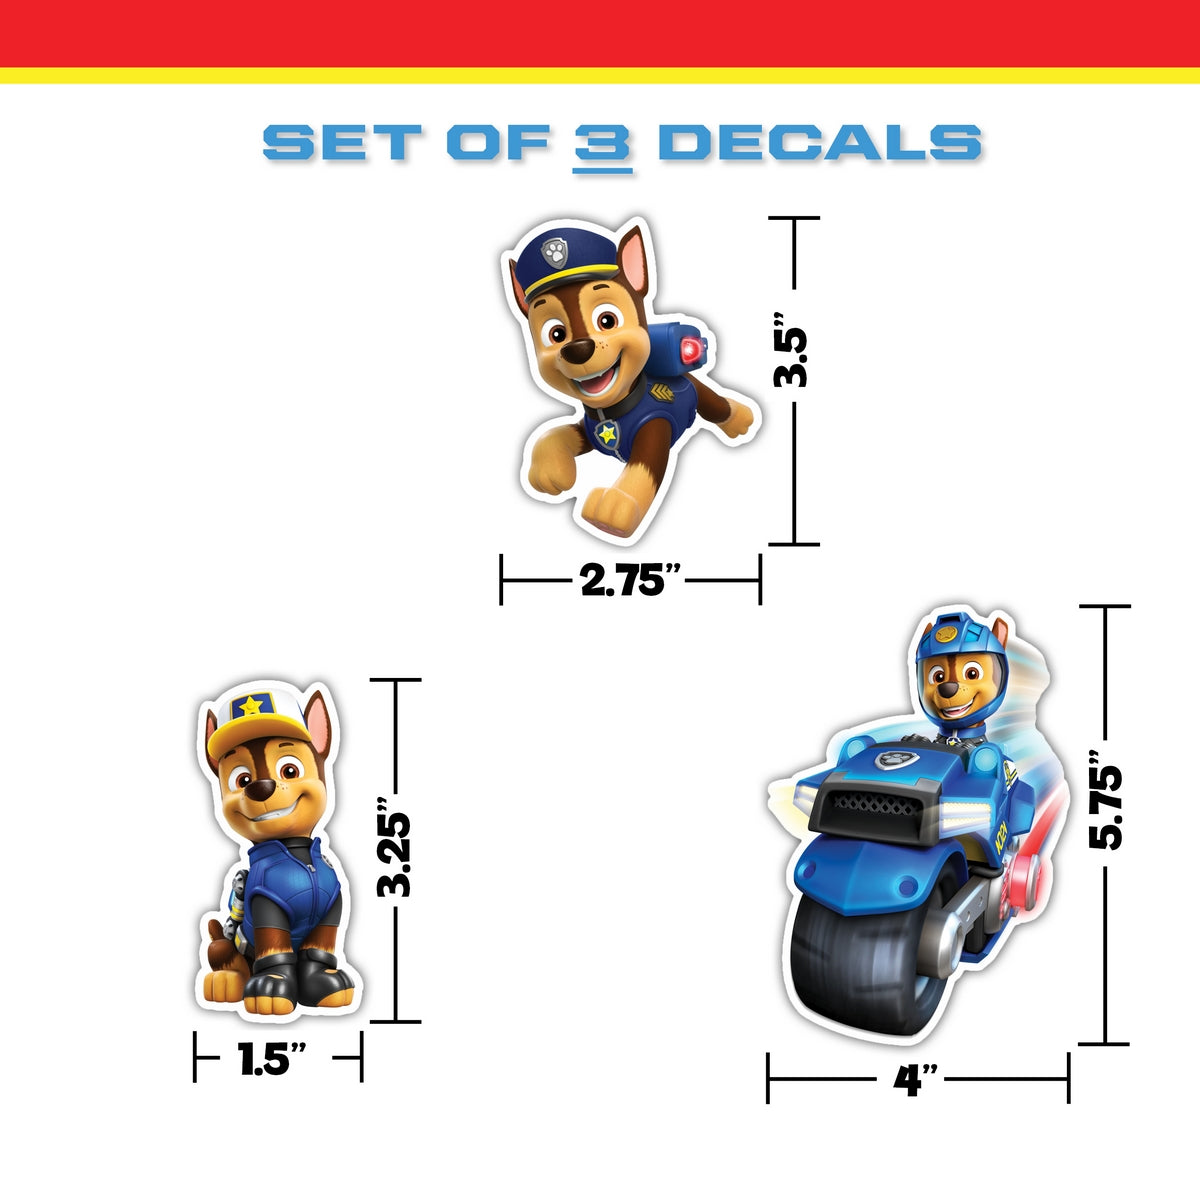 Paw Patrol Chase Decals